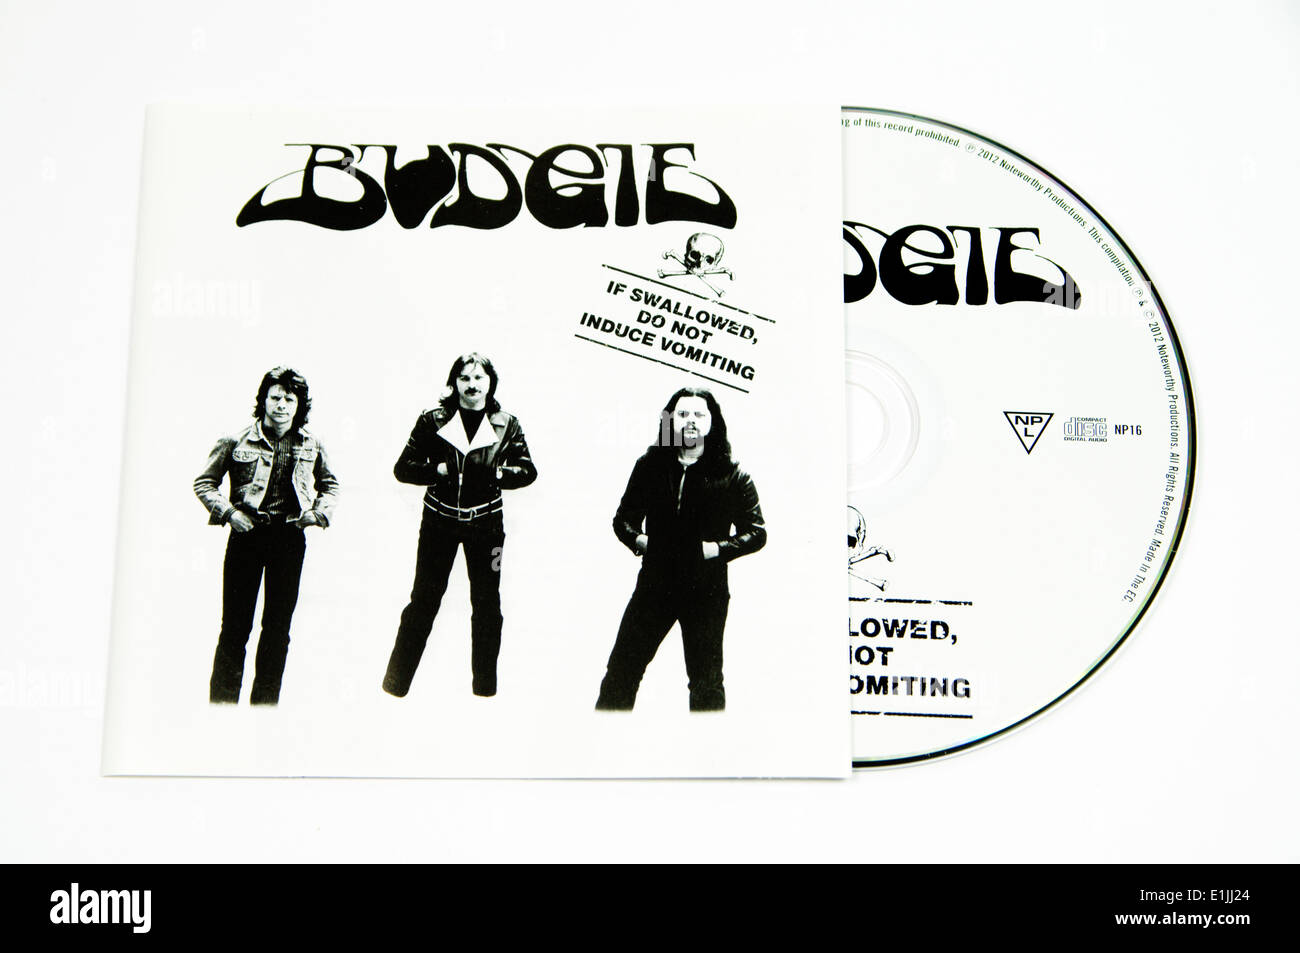 Budgie 'If swallowed to not induce vomiting' progressive rock album CD Stock Photo